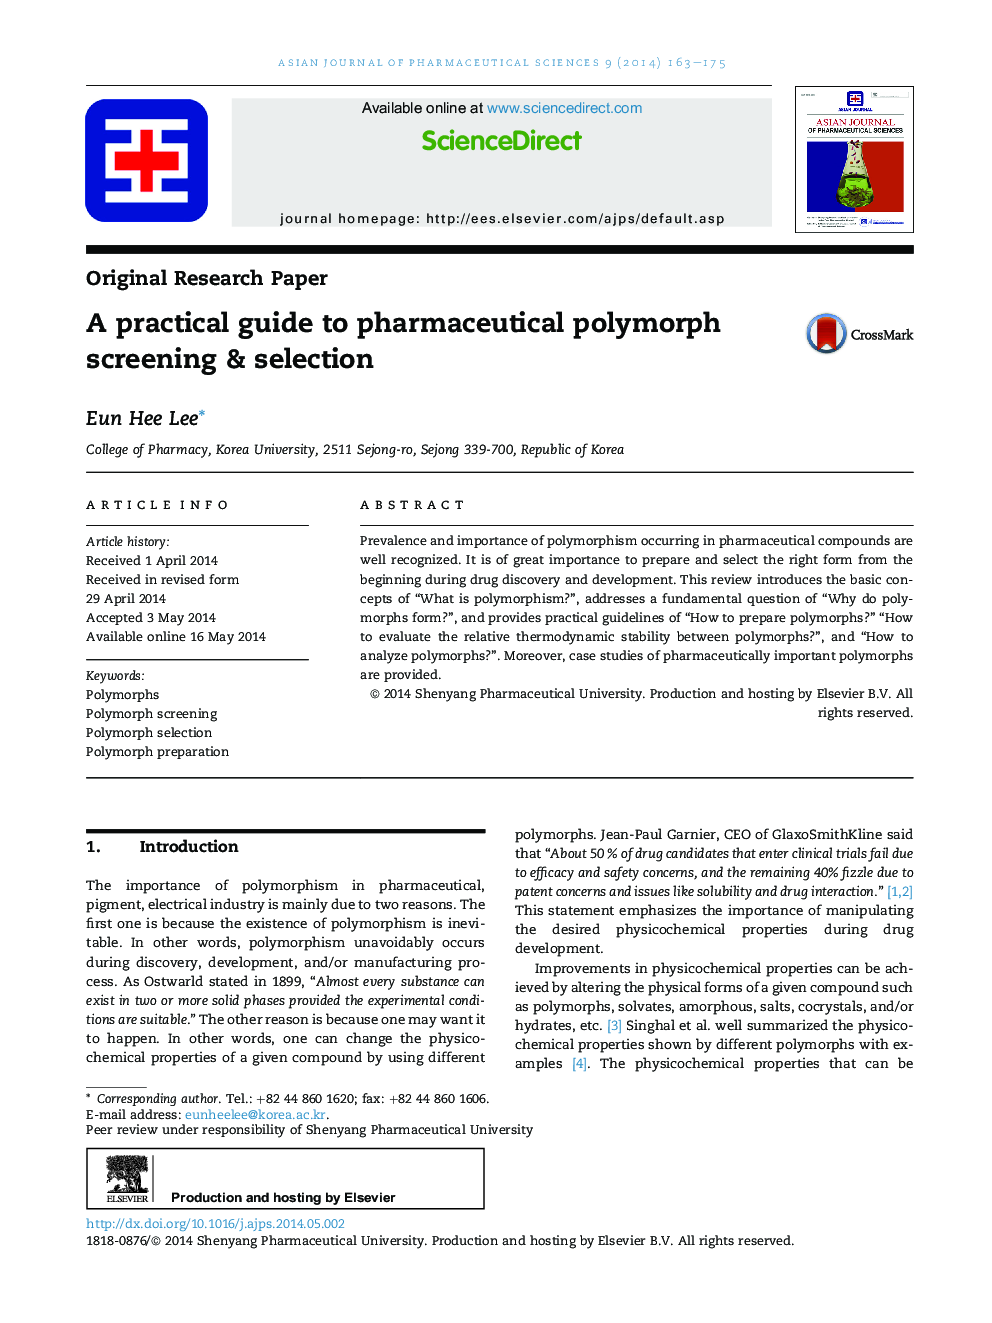 A practical guide to pharmaceutical polymorph screening & selection 